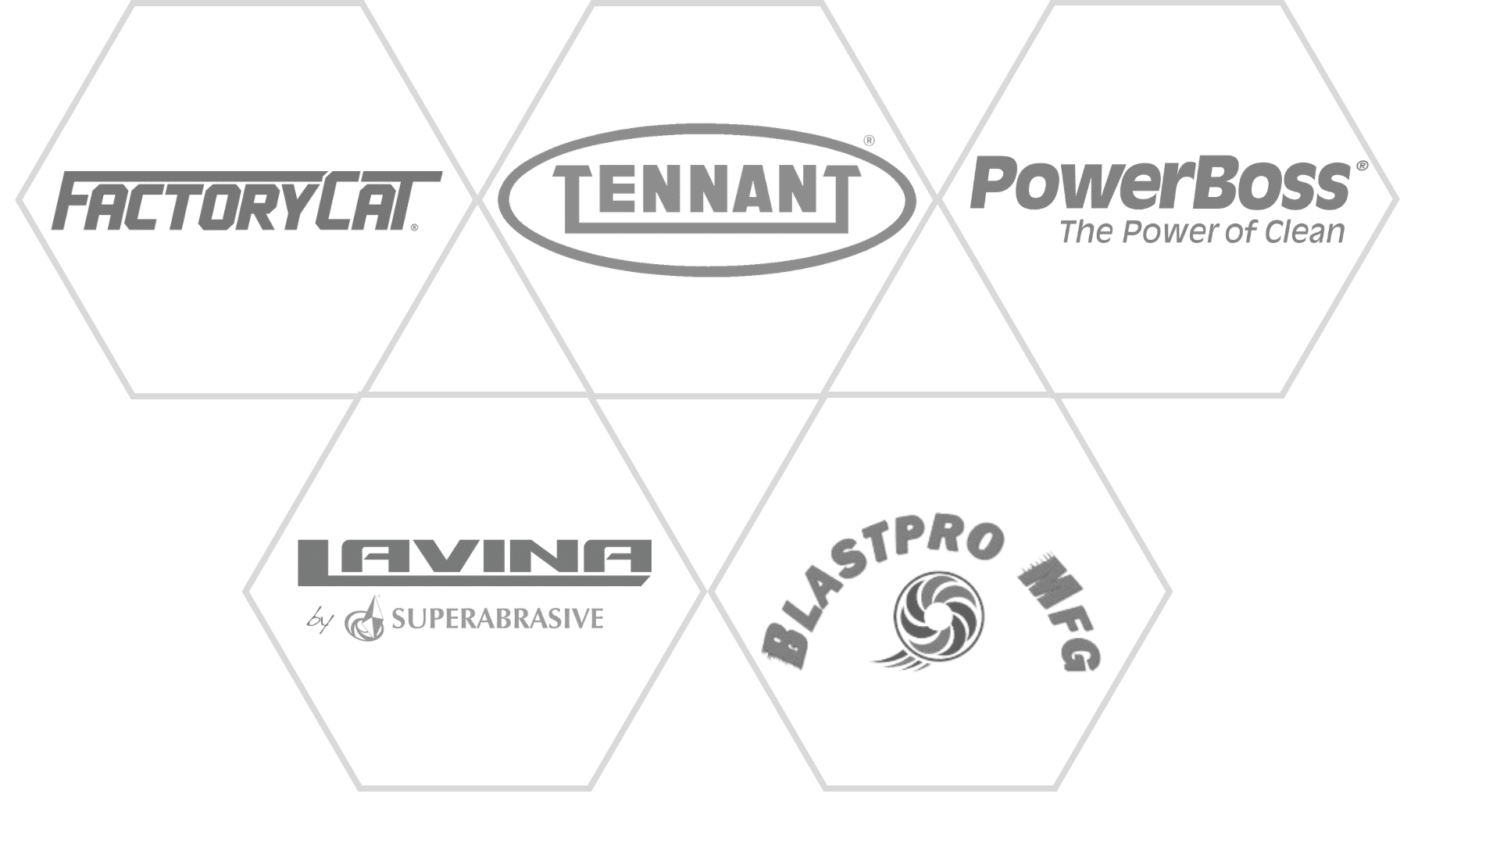 digitally created image of the manufacturers we partner with. The image contains the logos of Tennant co, Powerboss, factorycat, blast pro, and lavina